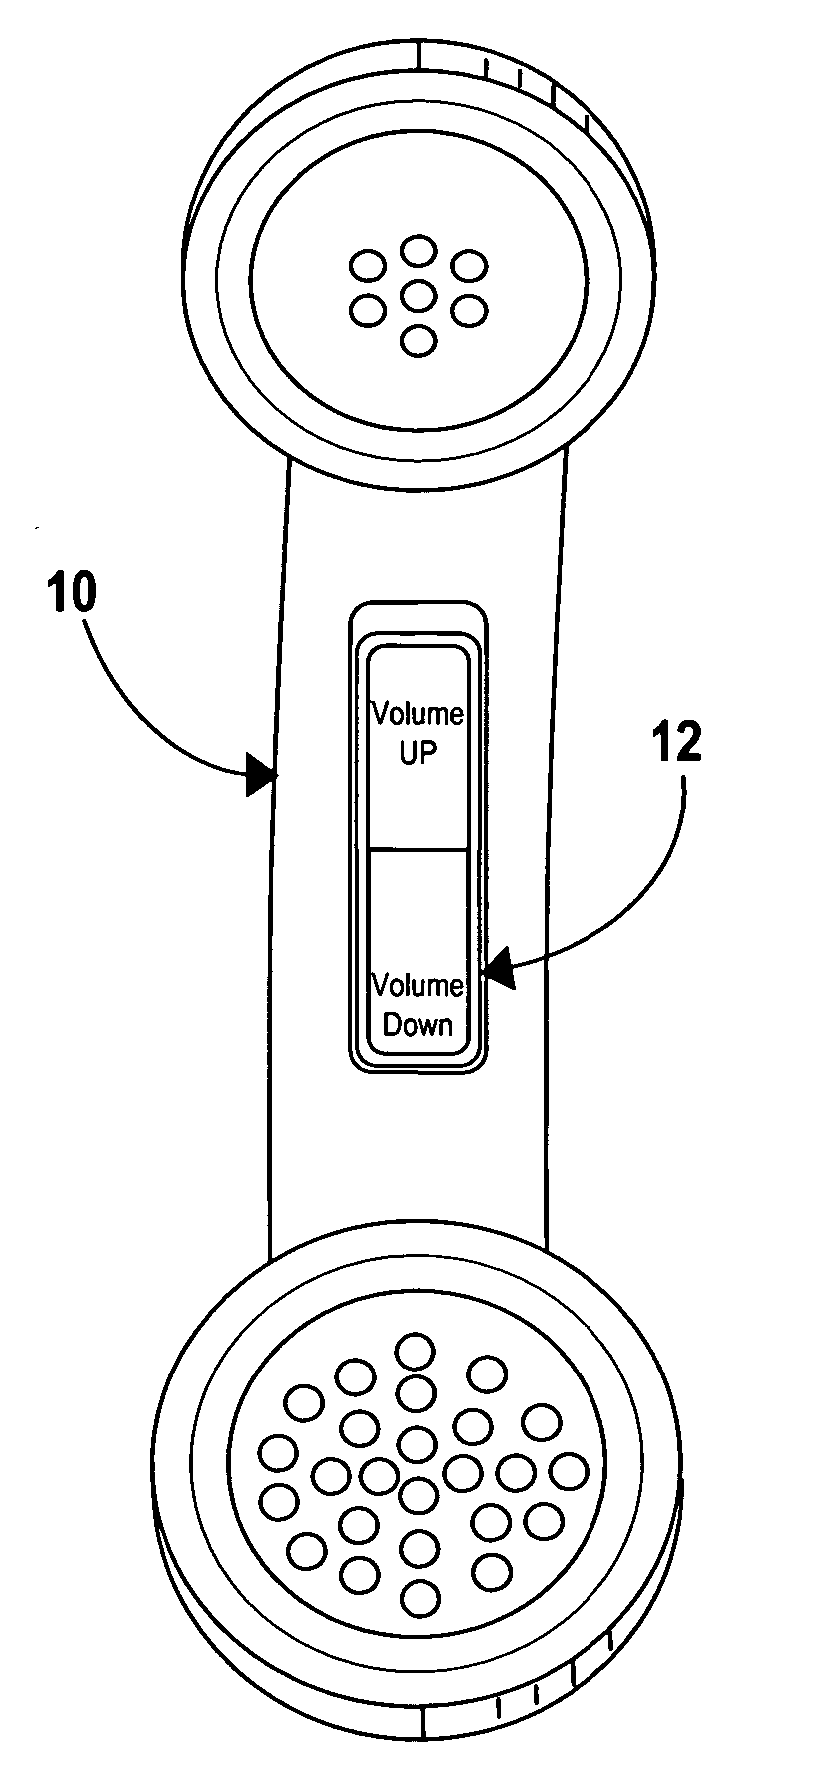 Direct coupling of telephone volume control with remote microphone gain and noise cancellation